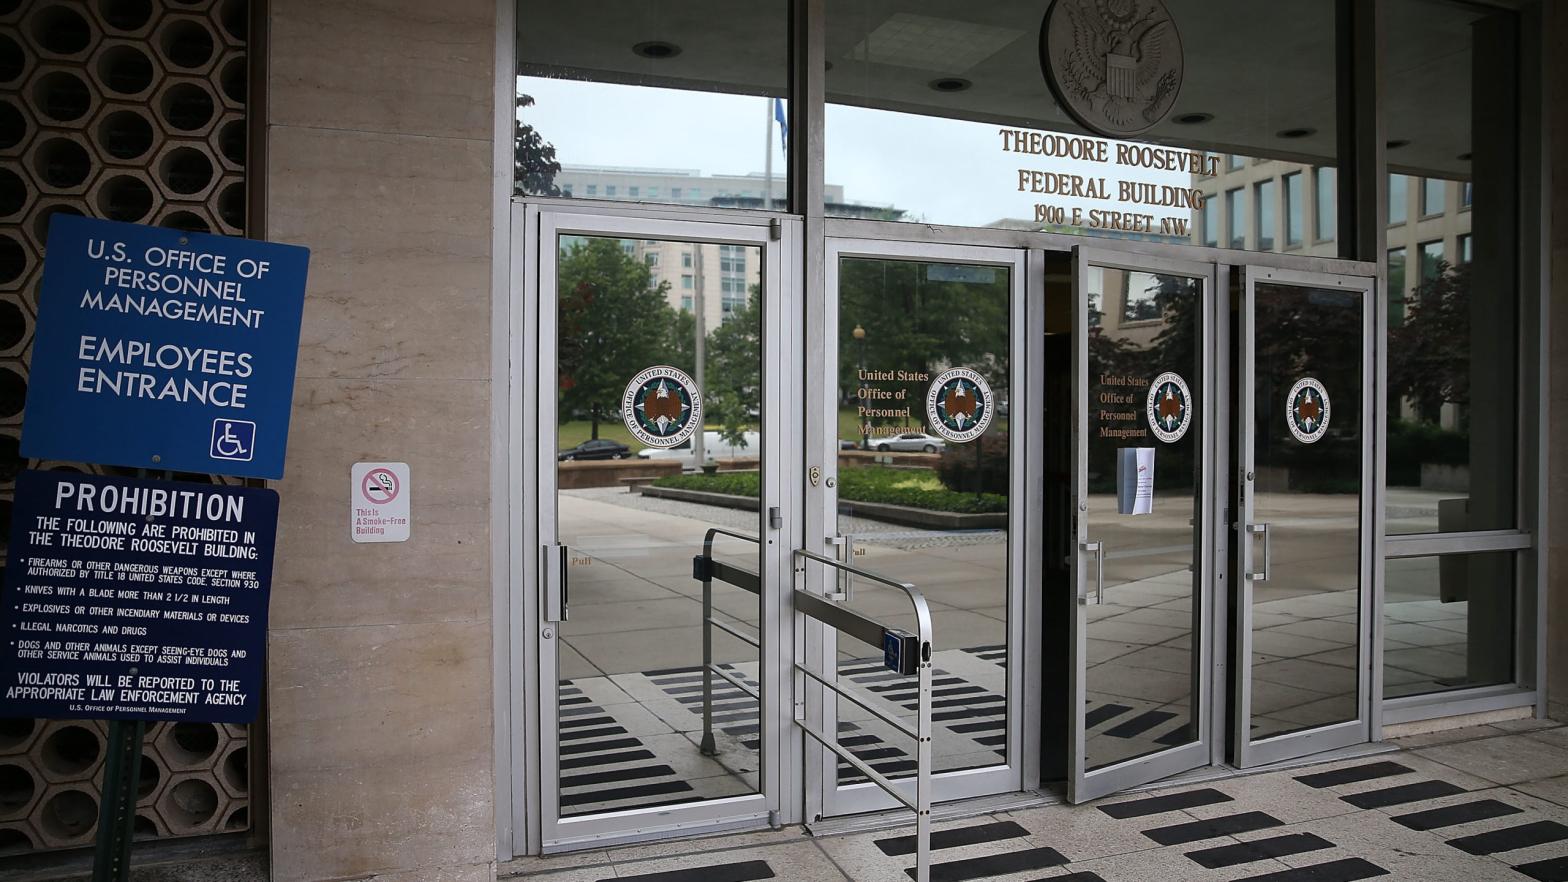 The Theodore Roosevelt Office building, where the Office of Personnel Management is headquartered, in Washington, DC in 2015. (Photo: Mark Wilson, Getty Images)